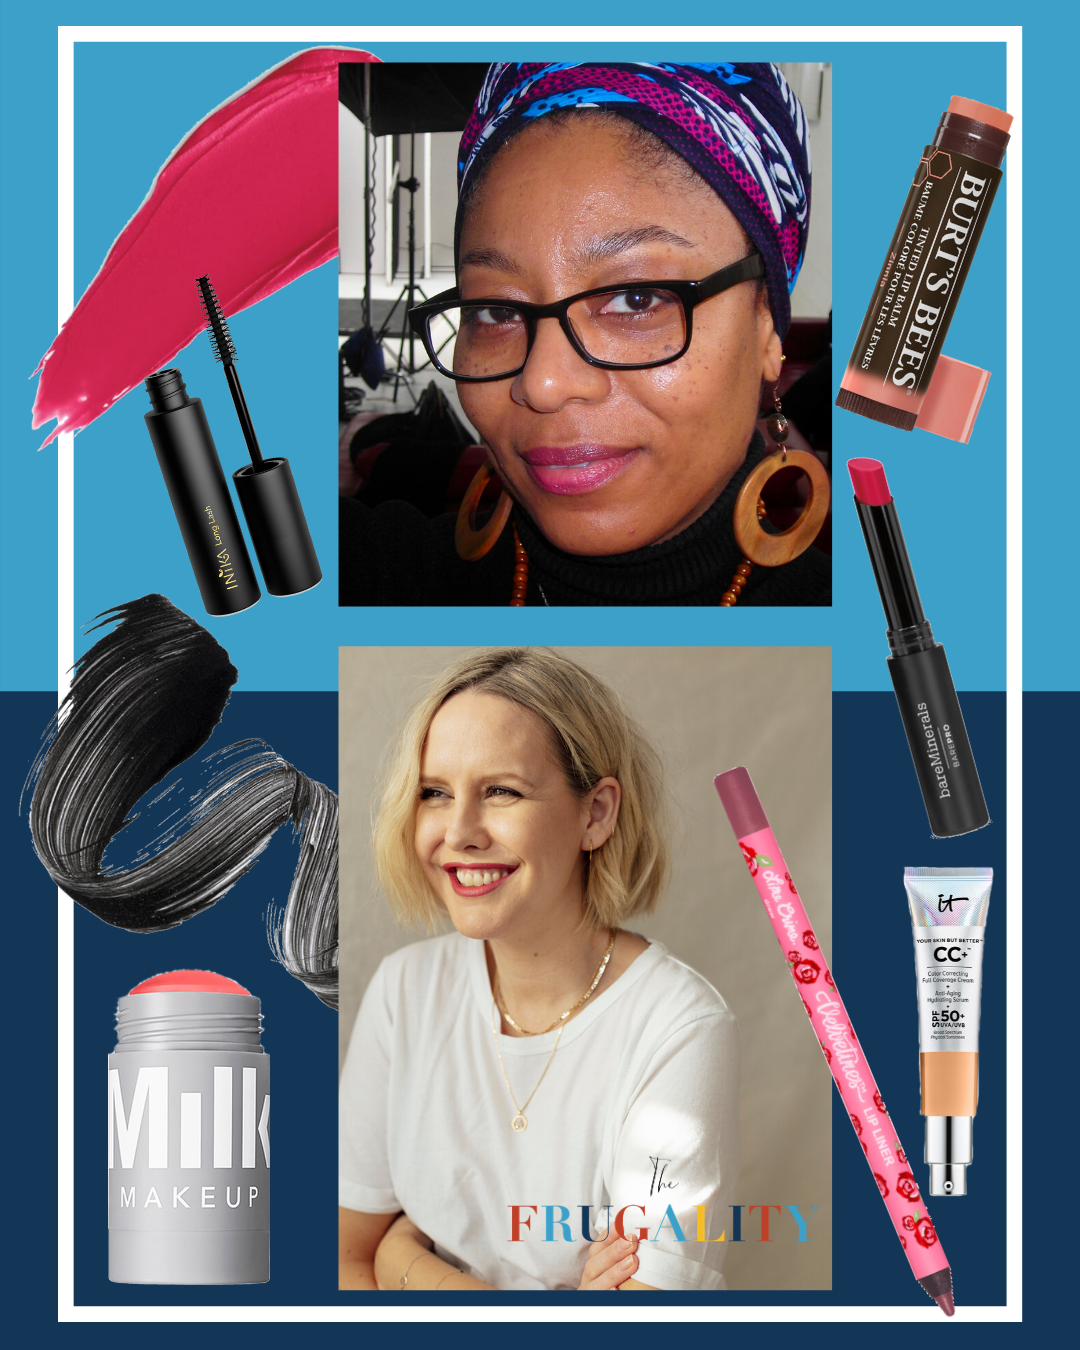 TWO CRUELTY-FREE BEAUTY LOOKS (AS RECOMMENDED BY MAKE-UP ARTIST JULIE JACOBS)